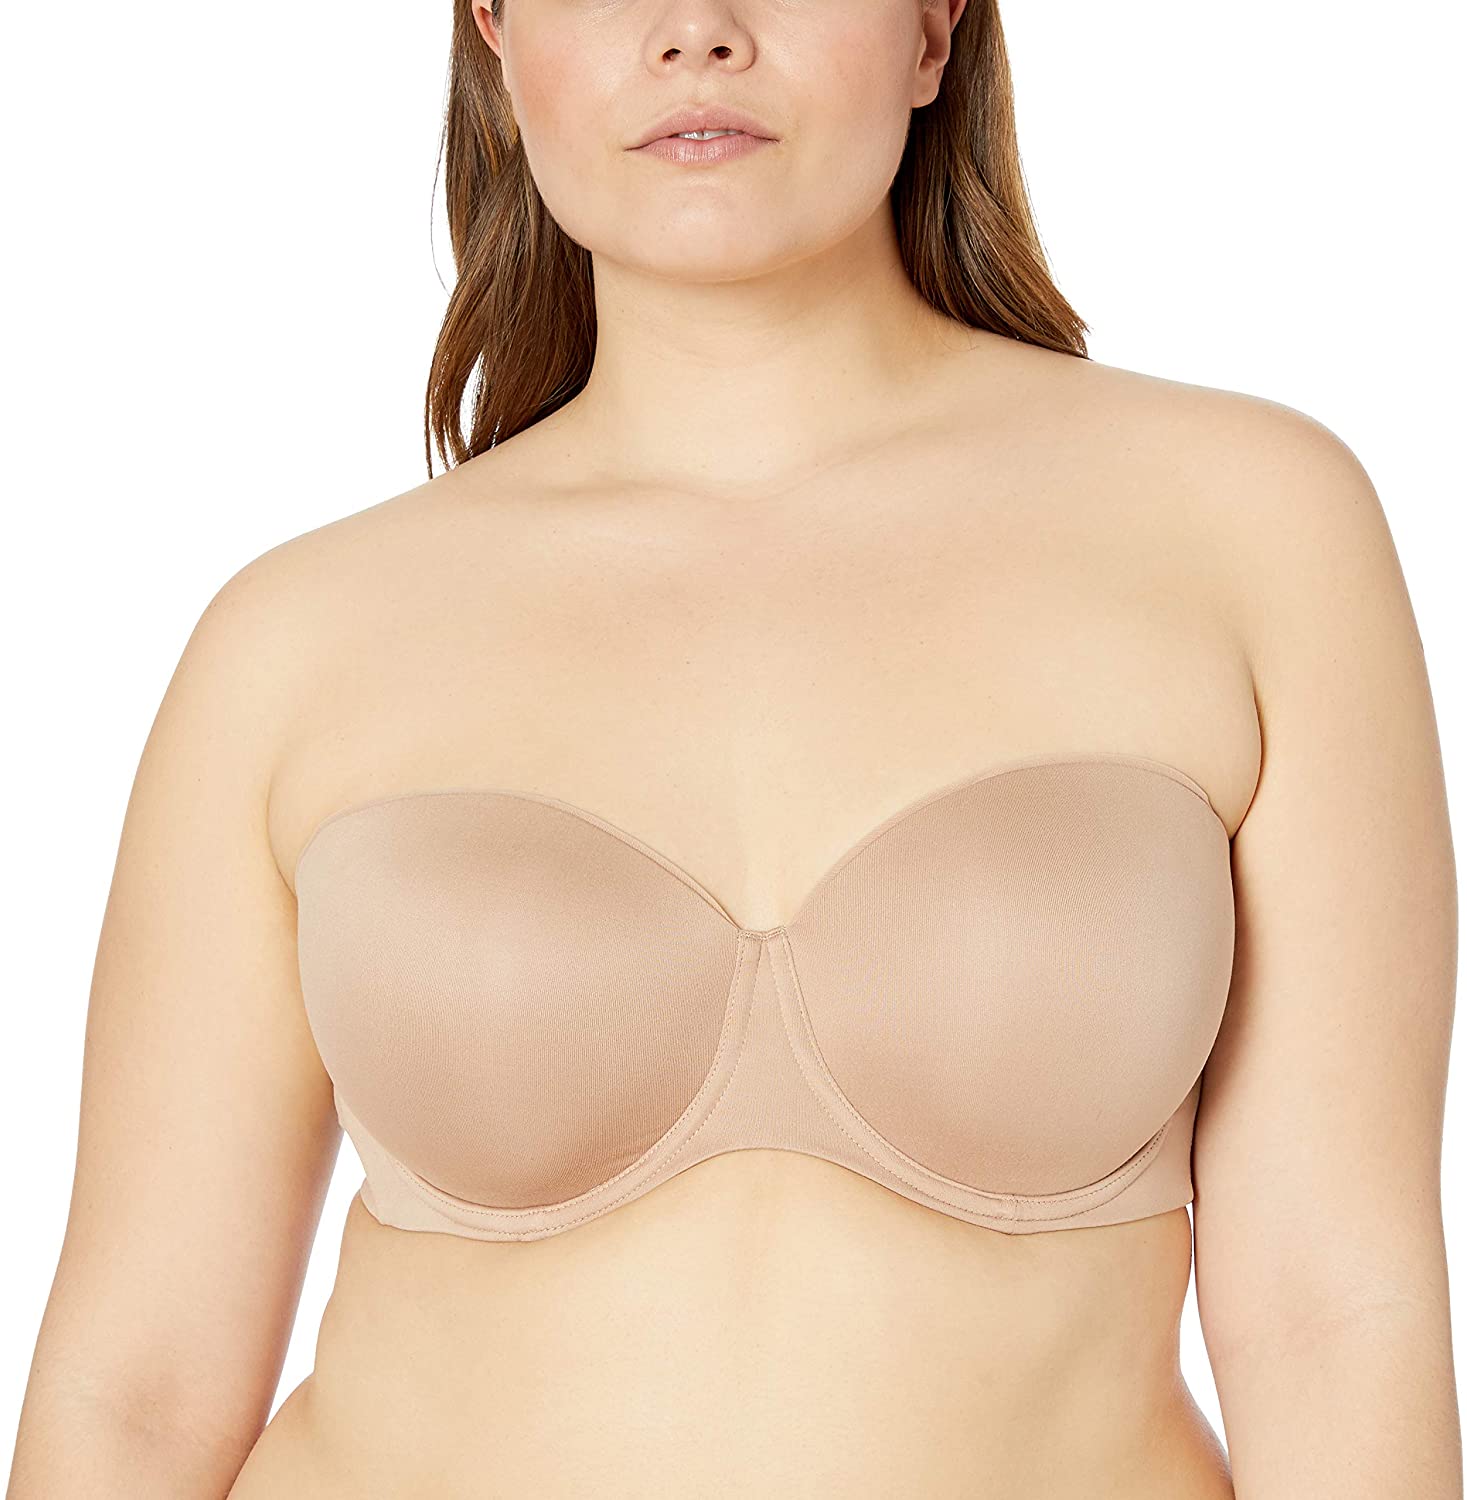 Price:$12.99 Warner's Women's Elements Fo Bliss Underwire Contour Strapless Bra at Amazon Women’s Clothing store